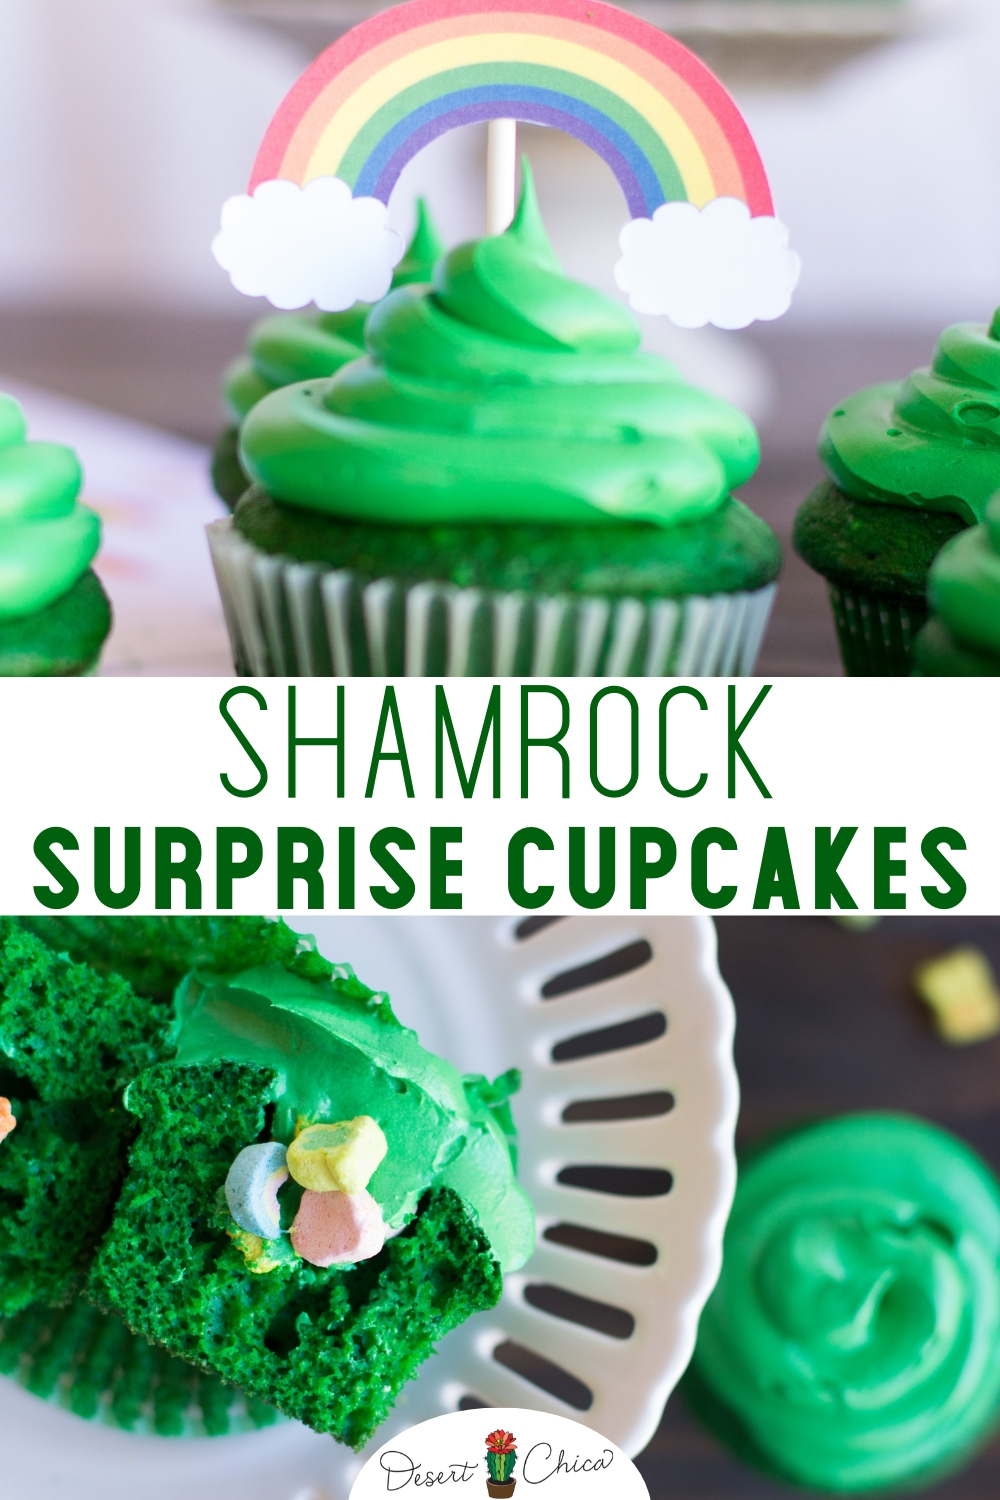 Check out these fun leprechaun inspired cupcakes with Lucky Charms hidden inside like a pinata. They are easy cupcakes to make with a surprise of marshmallows hidden inside for kids and adults to enjoy. Top with rainbow candy or a cupcake topper and you will have a festive dessert for St. Patrick's Day. St. Patricks Day Dessert | St. Patricks Day Food for Kids | St. Patrick's Day Dessert | Rainbow Cupcake | St. Patrick's Day Treats | St. Patrick's Day Cupcakes